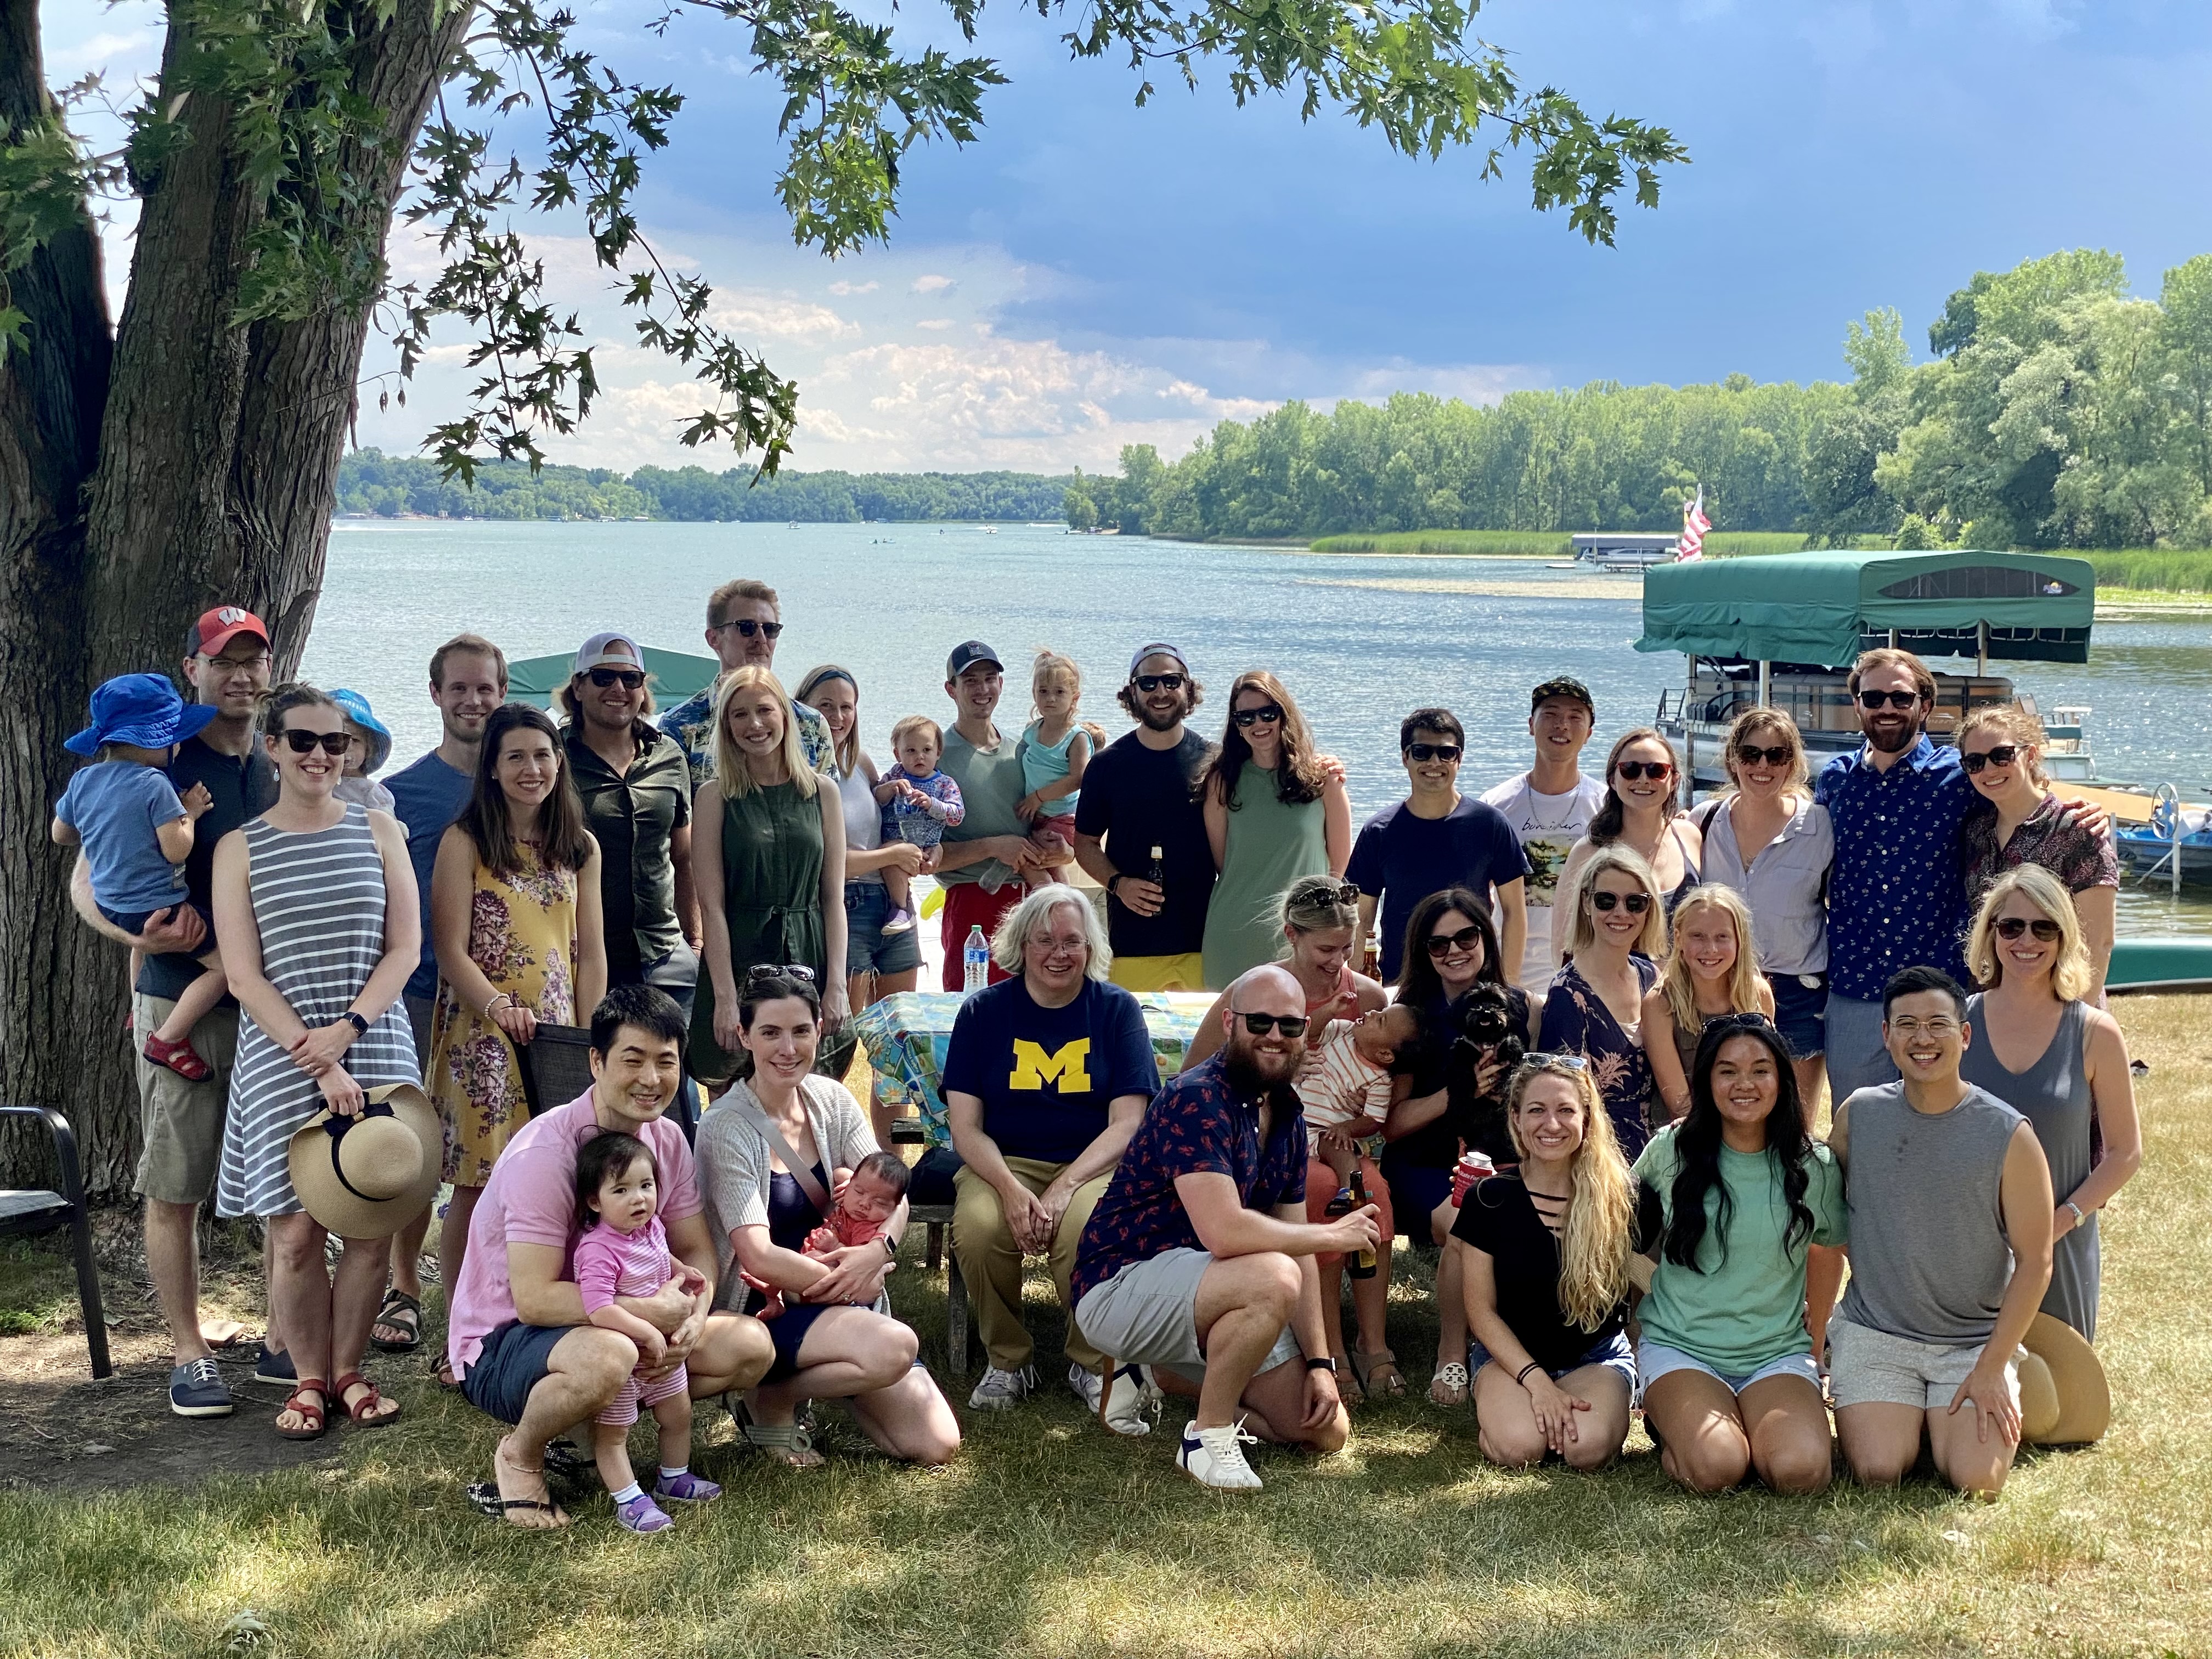 Residents and Family photo at a lakeside